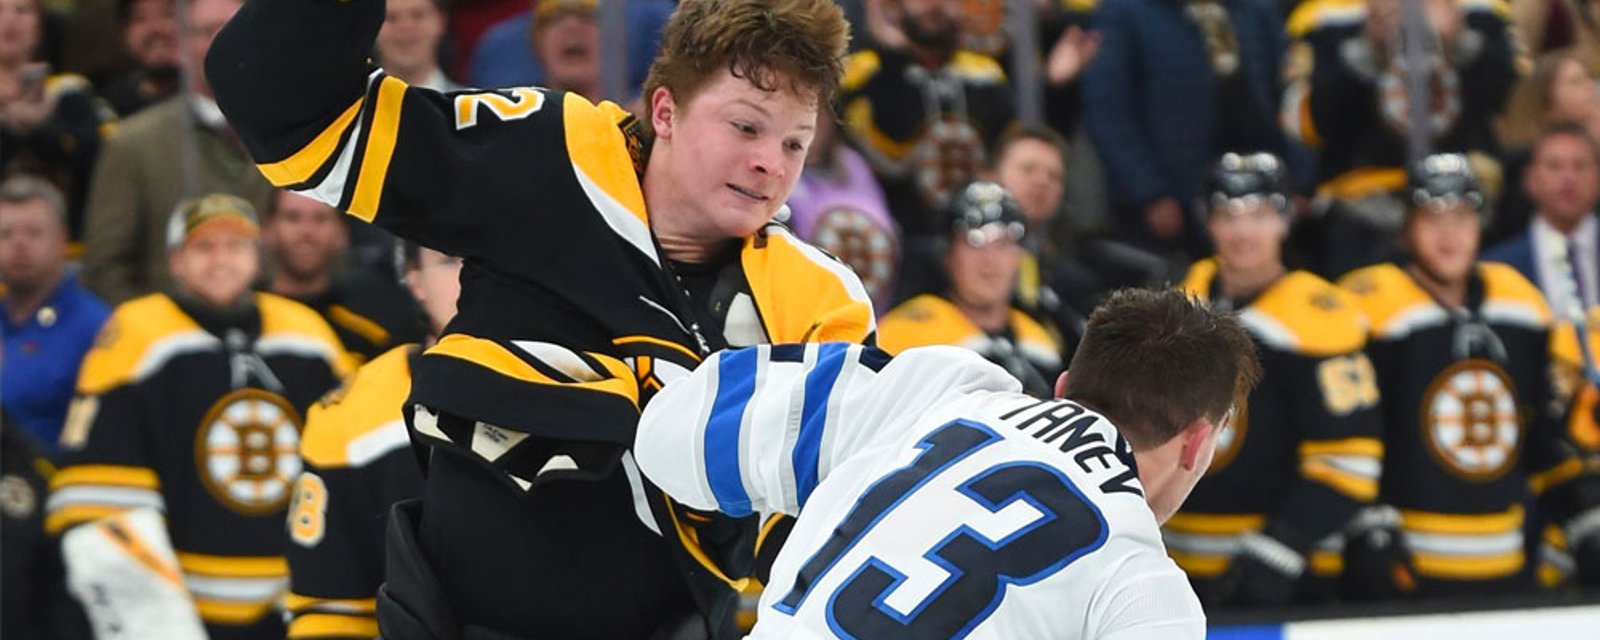 Bruins lose a player long-term, call up rookie Trent Frederic for game against Leafs